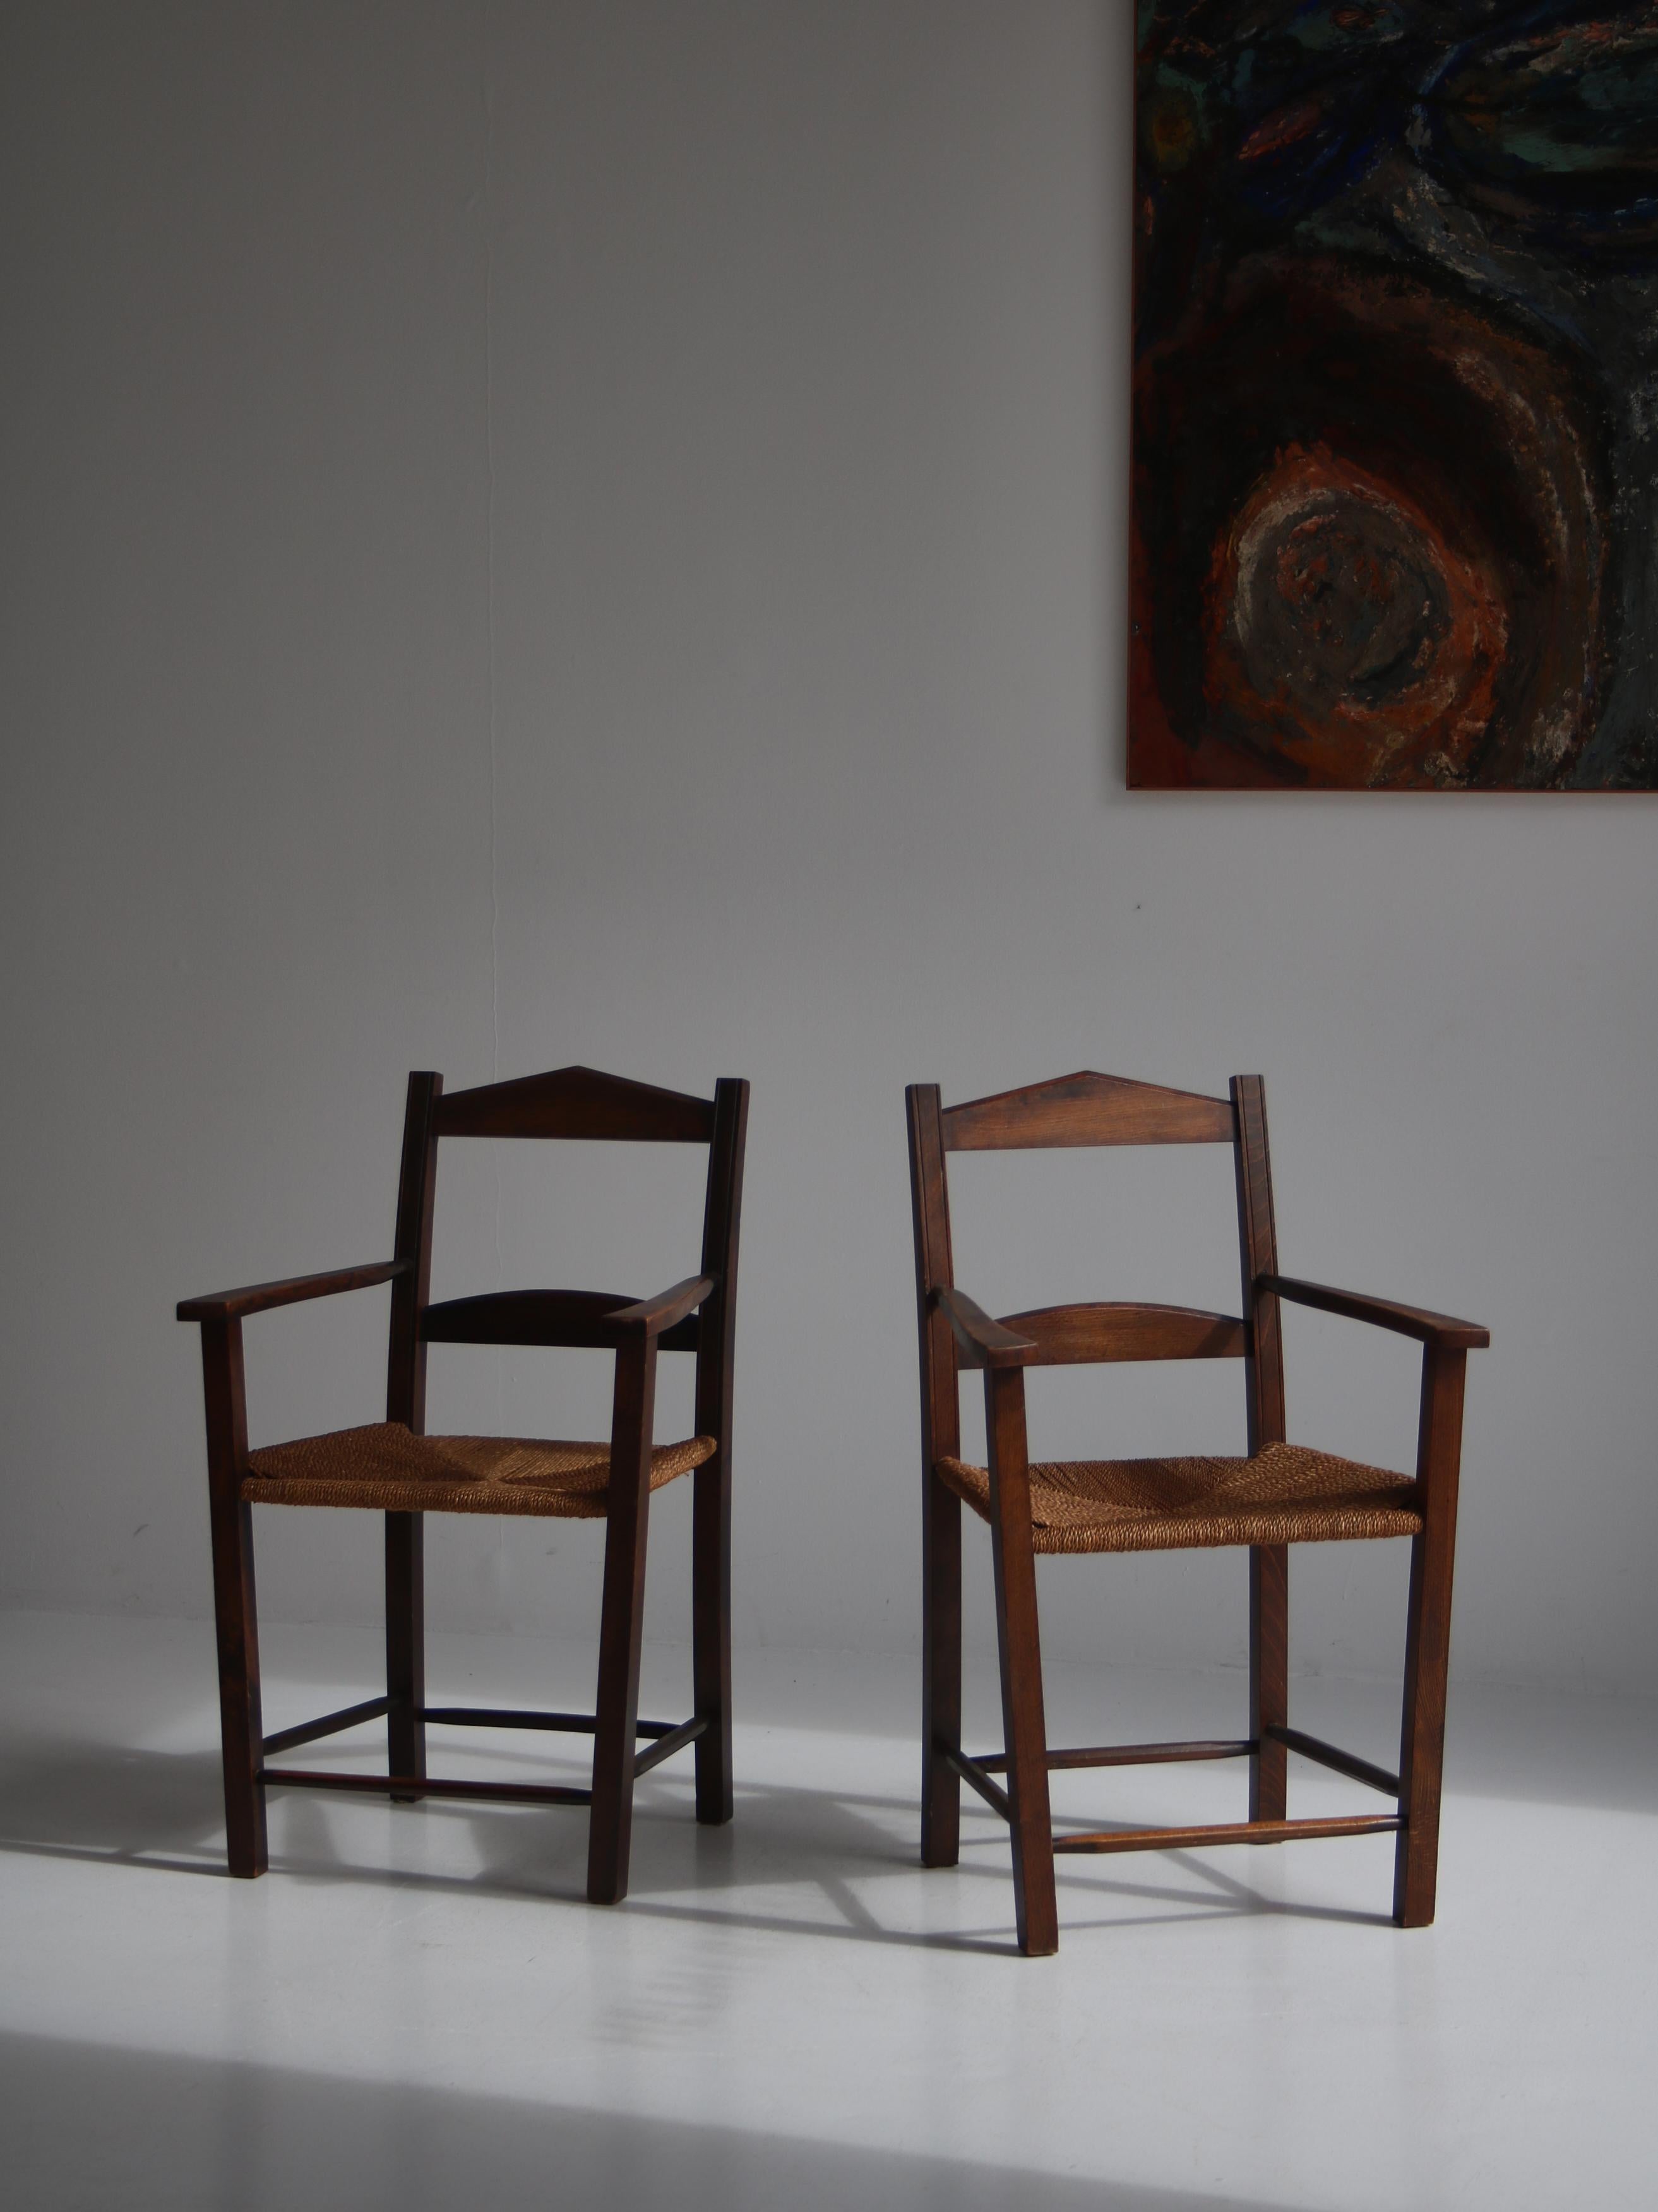 Charming pair of armchairs in dark stained pinewood with seats of woven seagrass. The chairs are made in Denmark in the 1930-40s and have never been refinished. The design is simplistic yet elegant and the patina is just perfect. In the style of